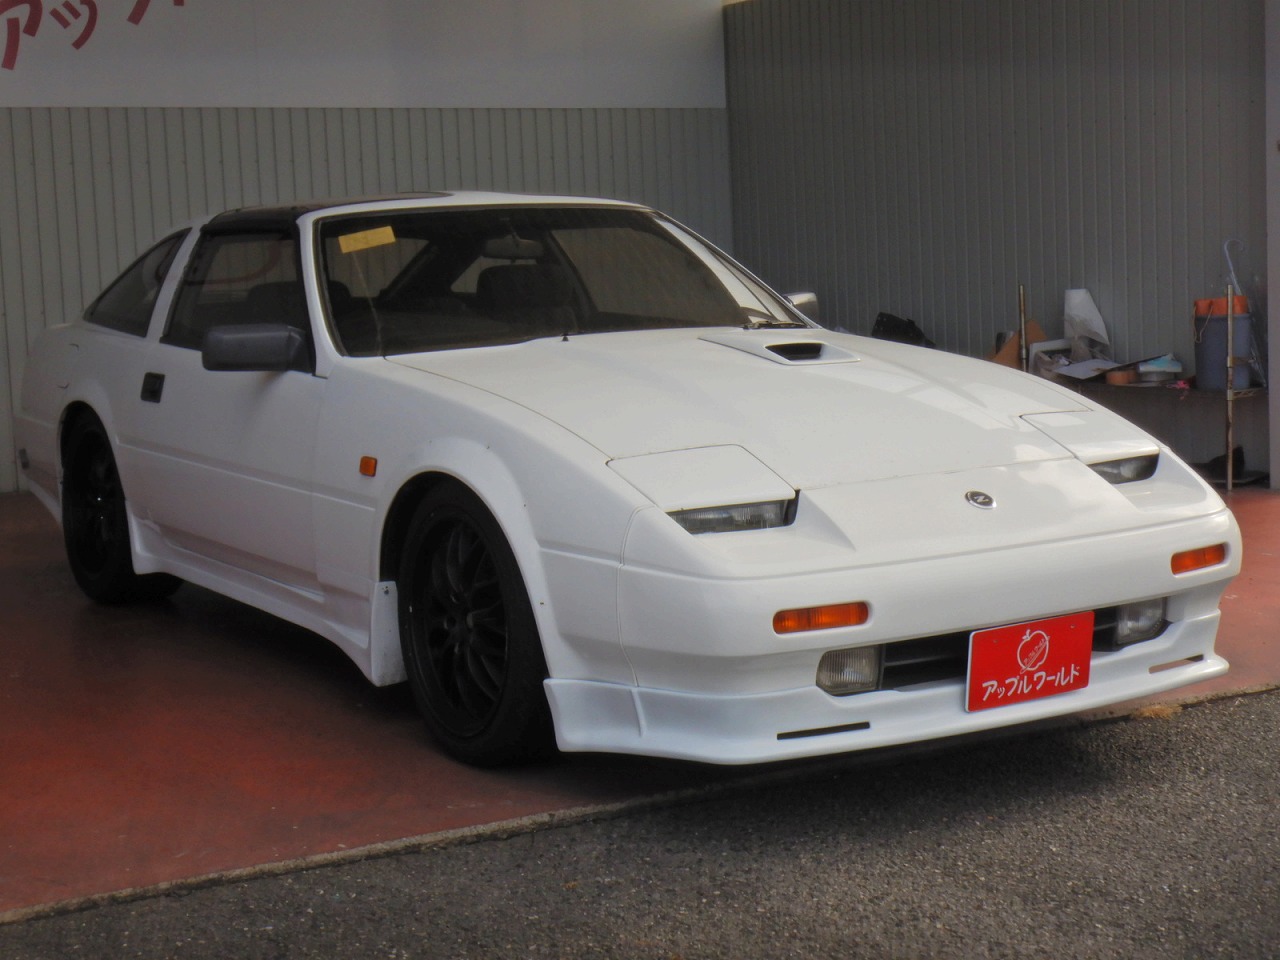 Used NISSAN FAIRLADY Z 1988/Jan CFJ8125941 in good condition for sale